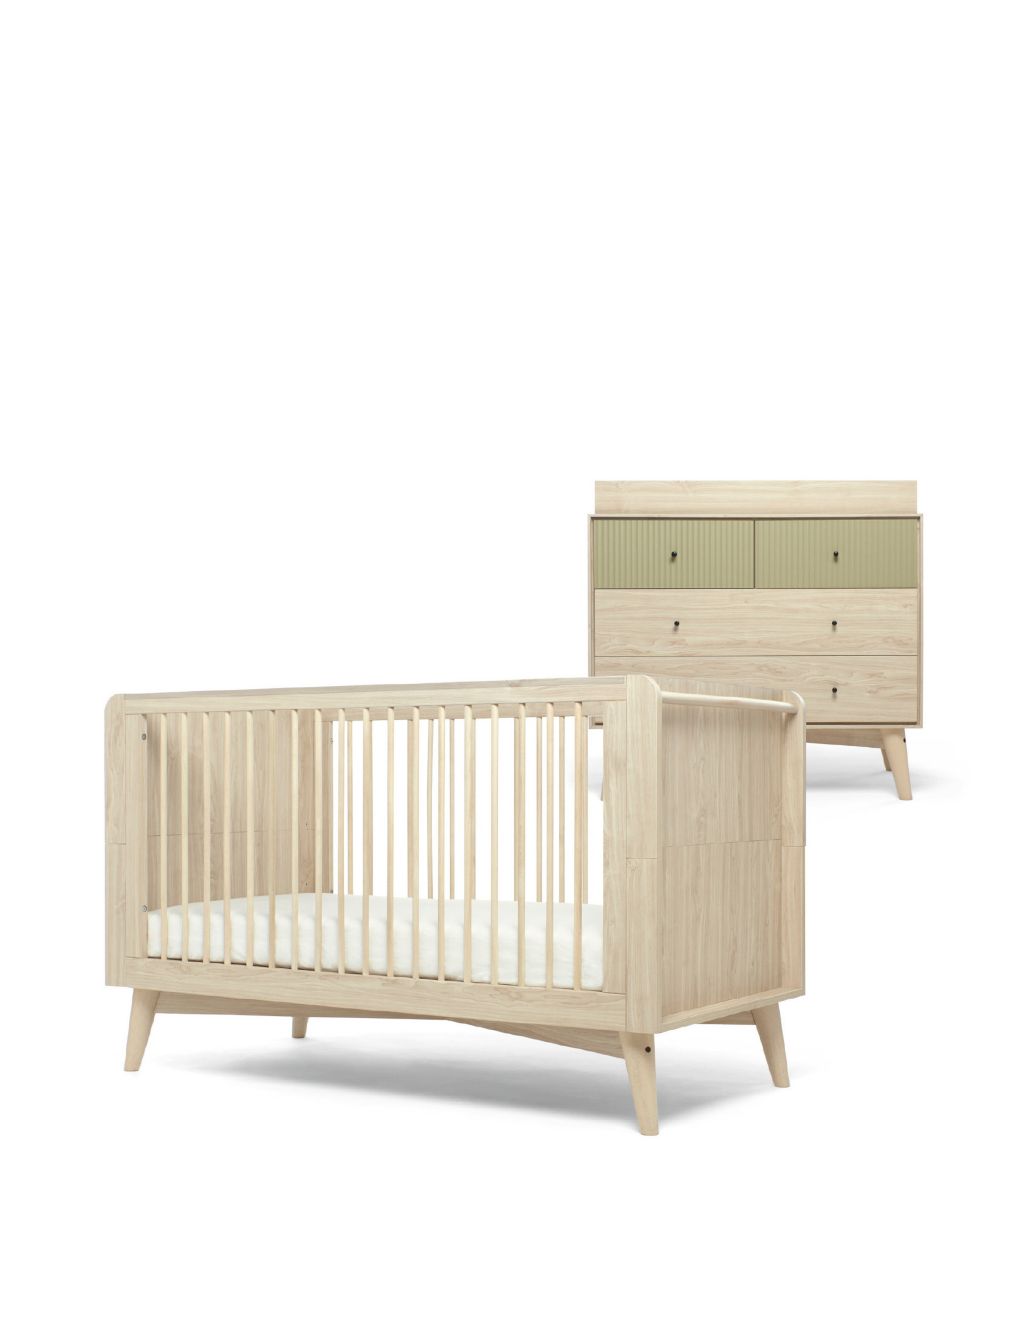 Coxley 2 Piece Cotbed Set with Dresser image 1